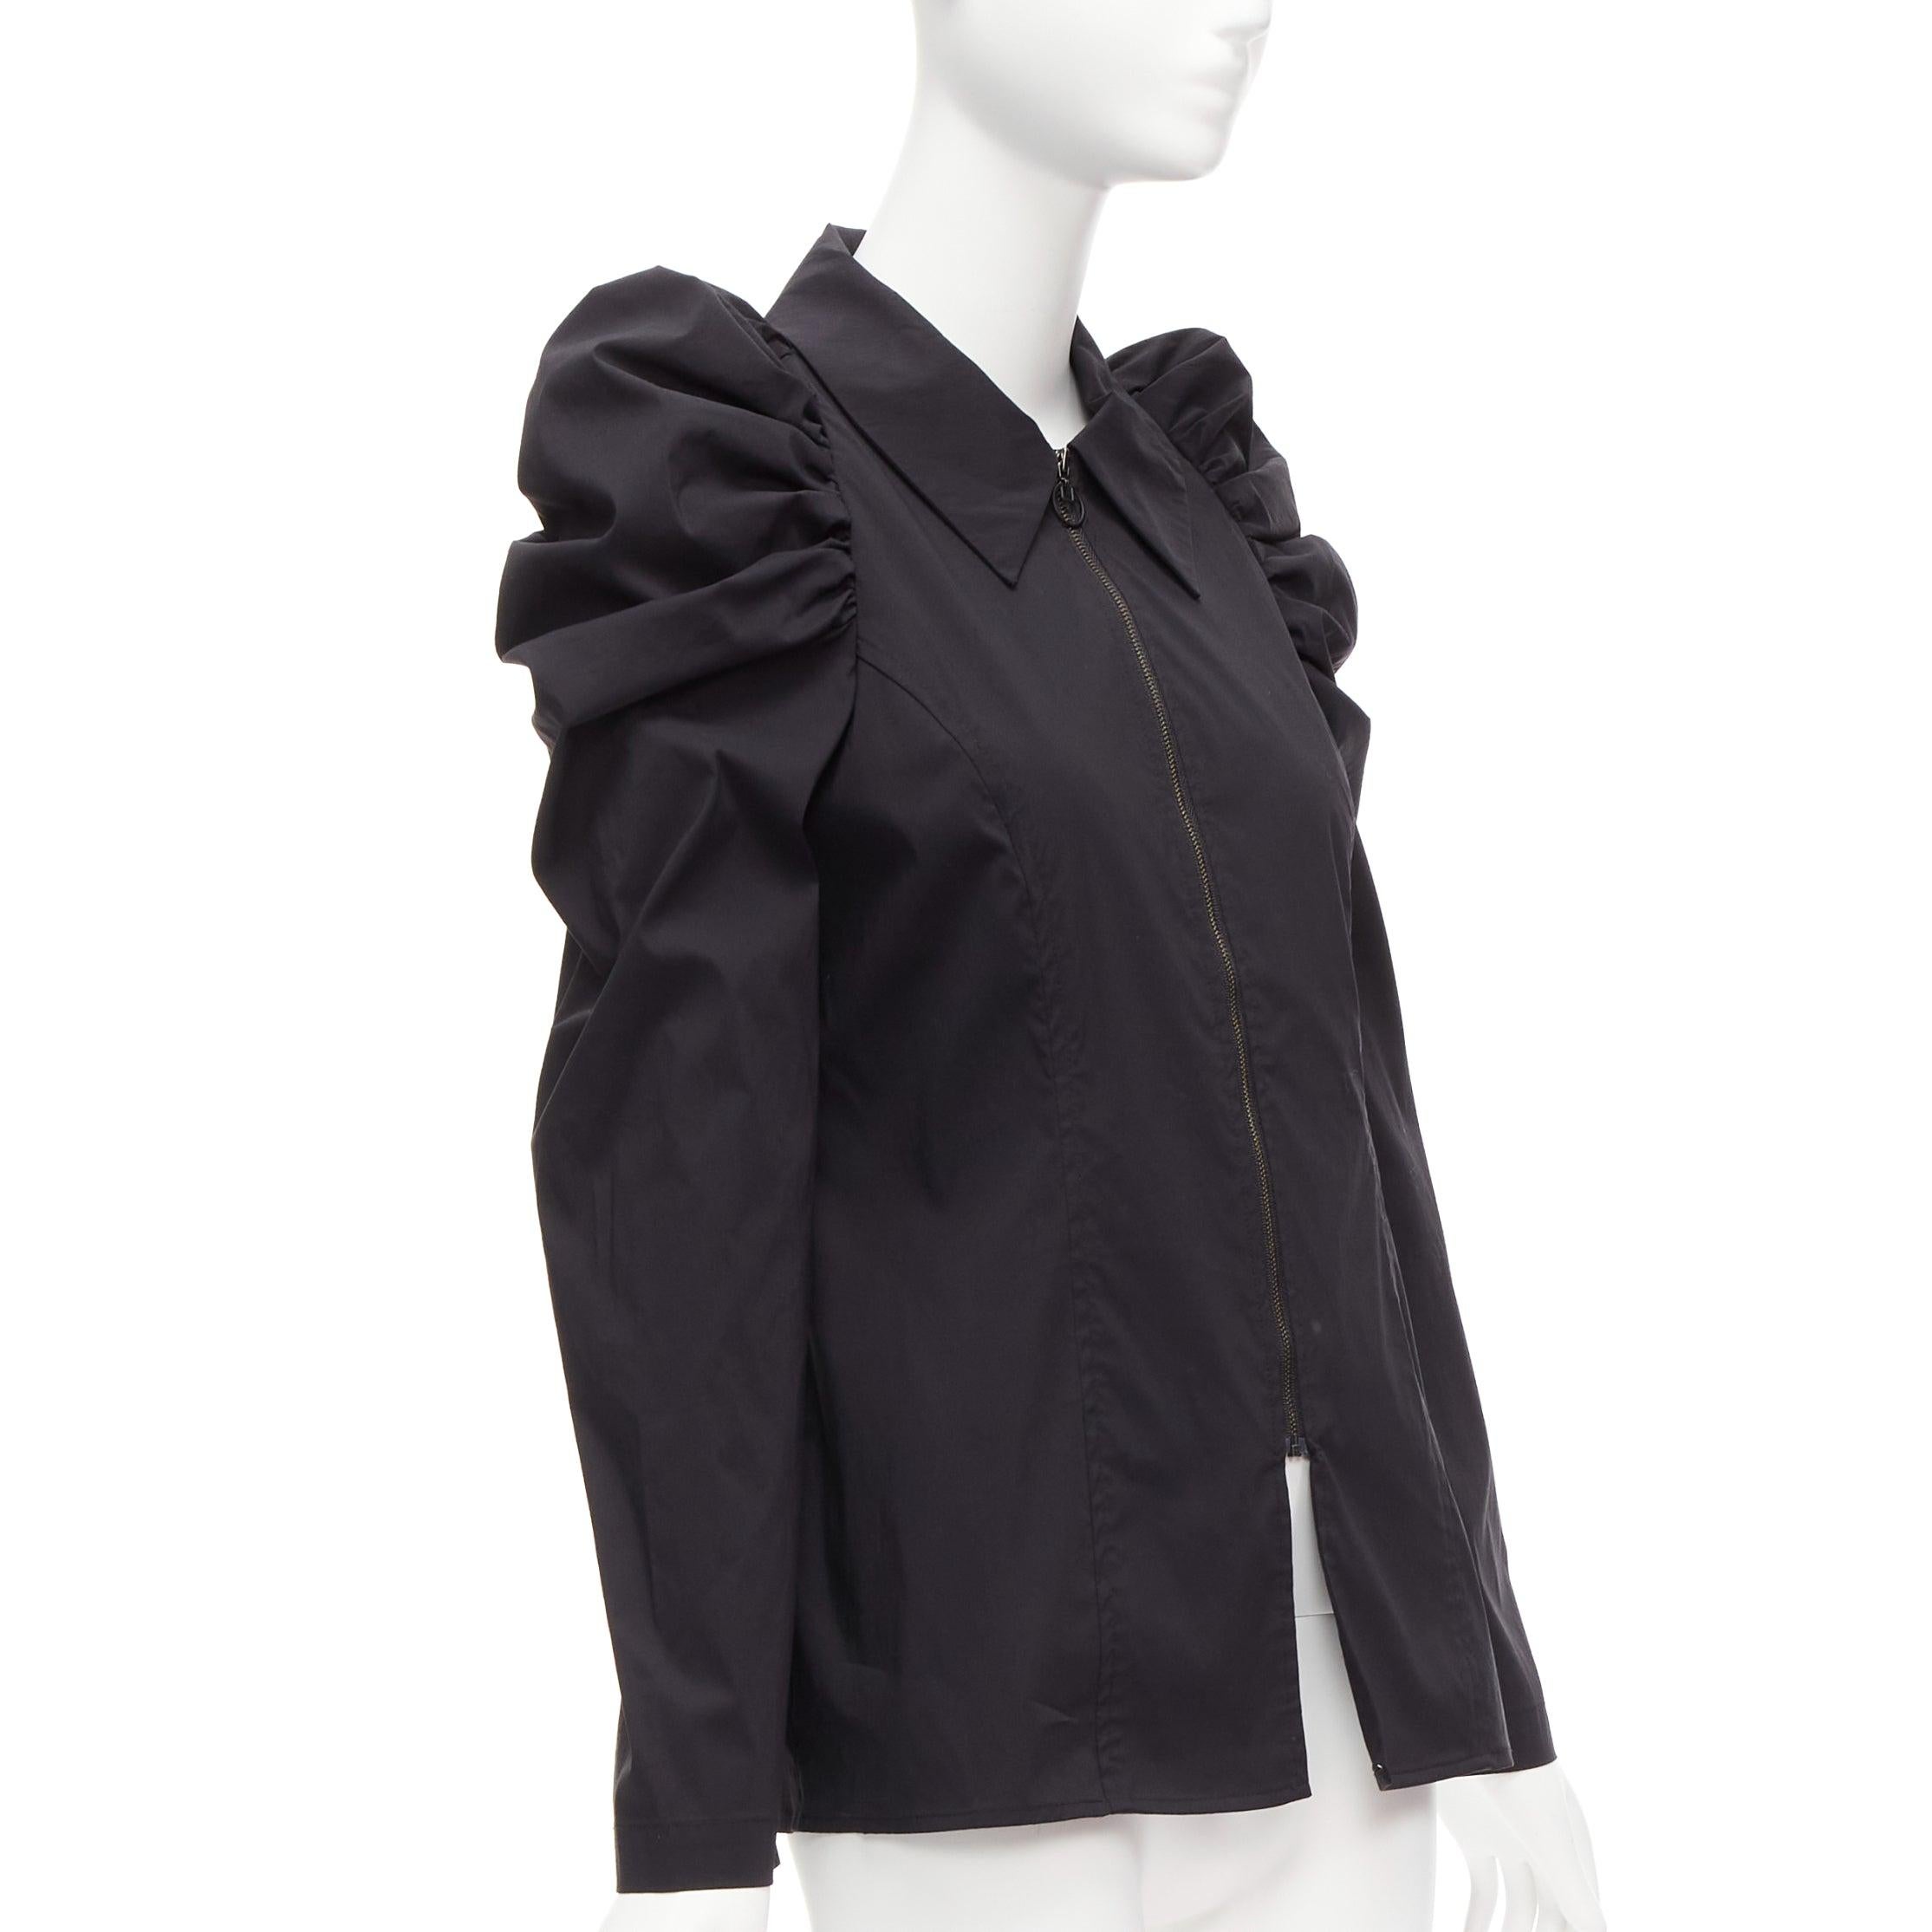 MINJUKIM 2022 black Victorian puff sleeve zip front cotton blend shirt IT36 XXS
Reference: AAWC/A00678
Brand: Minjukim
Collection: 2022
Material: Cotton, Blend
Color: Black
Pattern: Solid
Closure: Zip
Extra Details: Zip front closure. Gathered puff